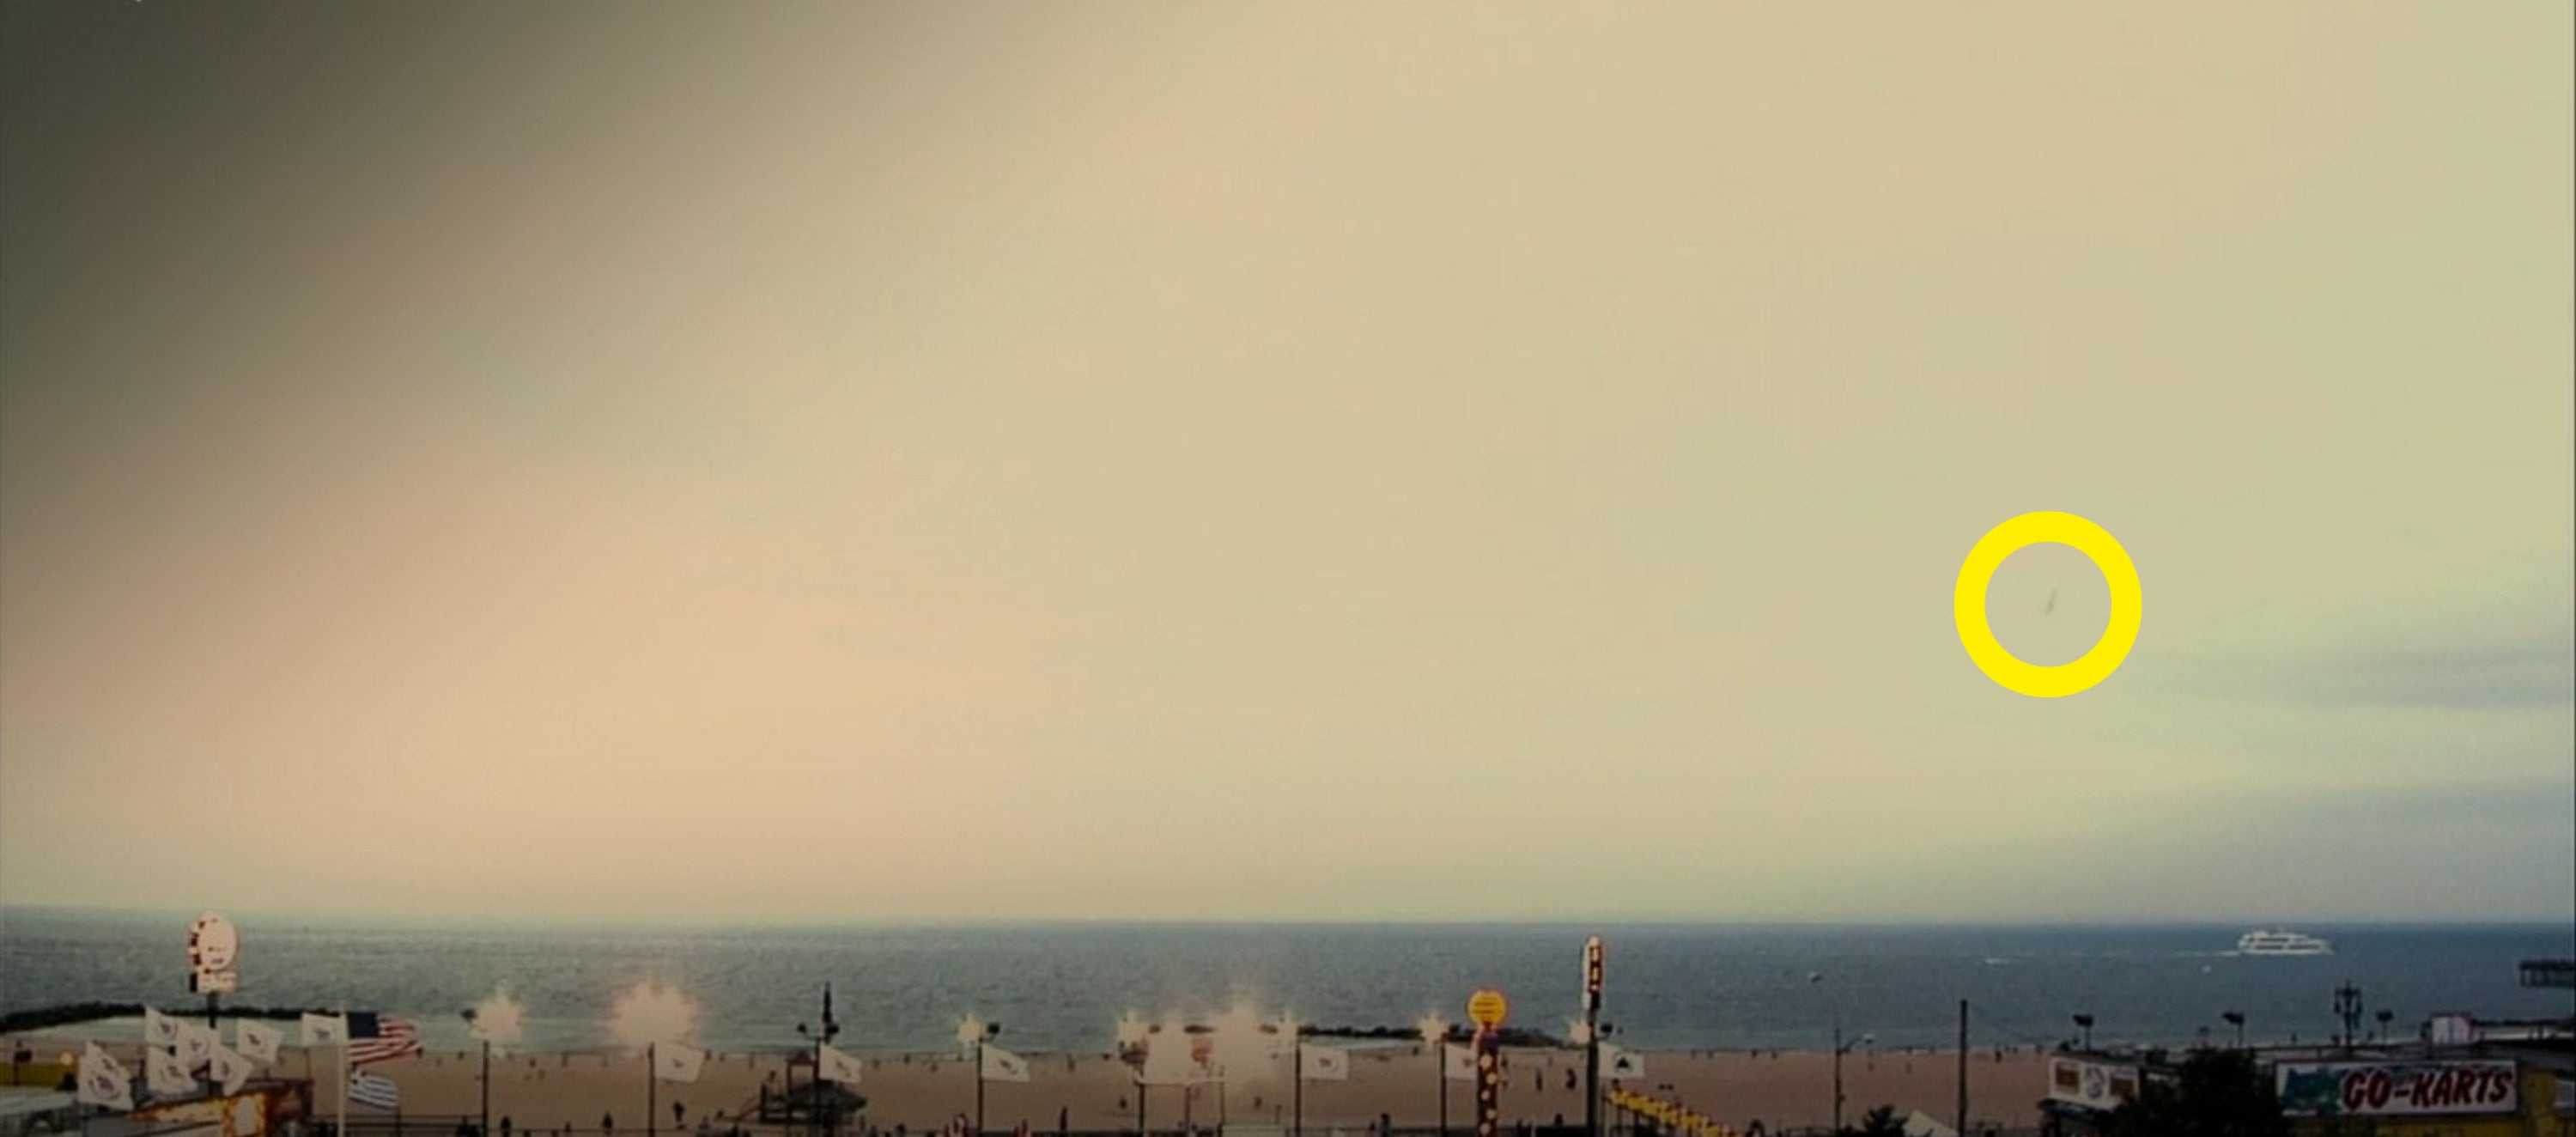 A shot of the beach on Coney Island where an object is falling into the ocean from the ocean in &quot;Cloverfield&quot;